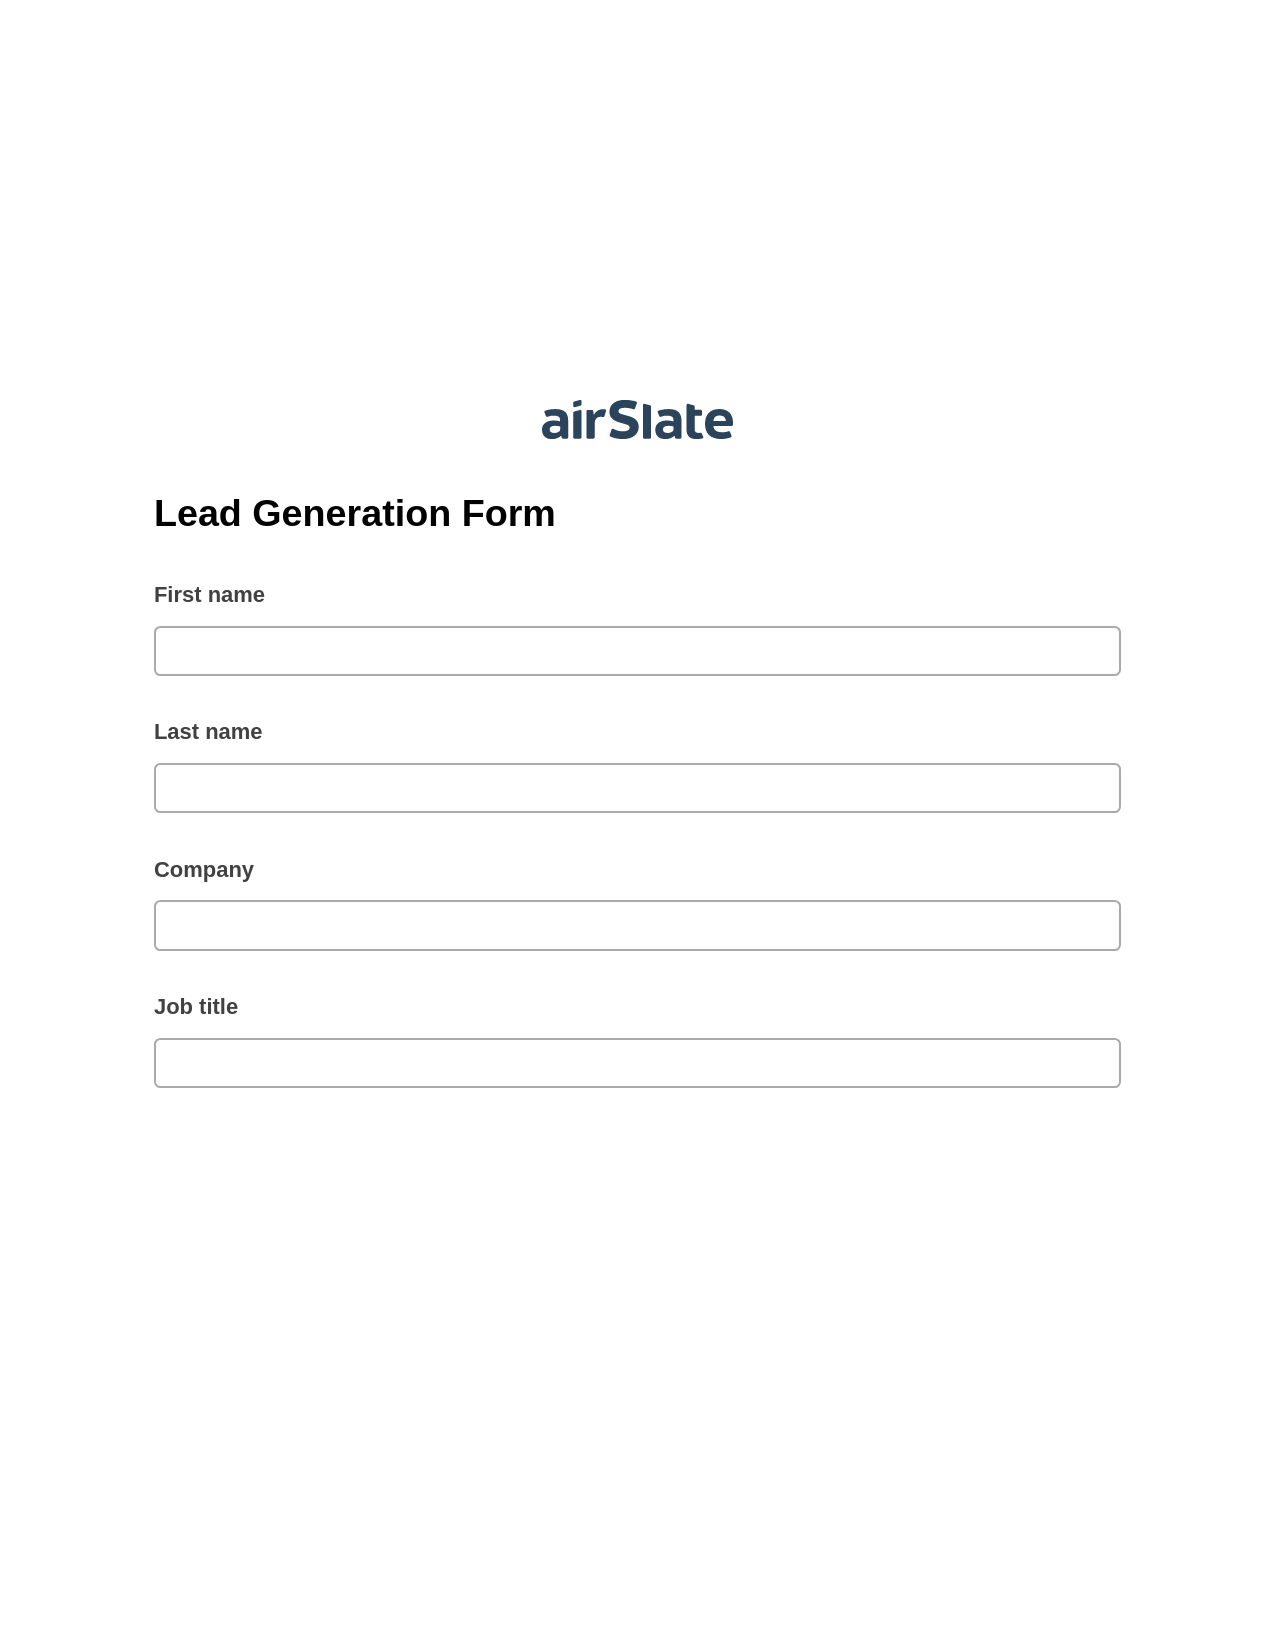 Lead Generation Form Pre-fill from Excel Spreadsheet Bot, Add Tags to Slate Bot, Archive to Box Bot